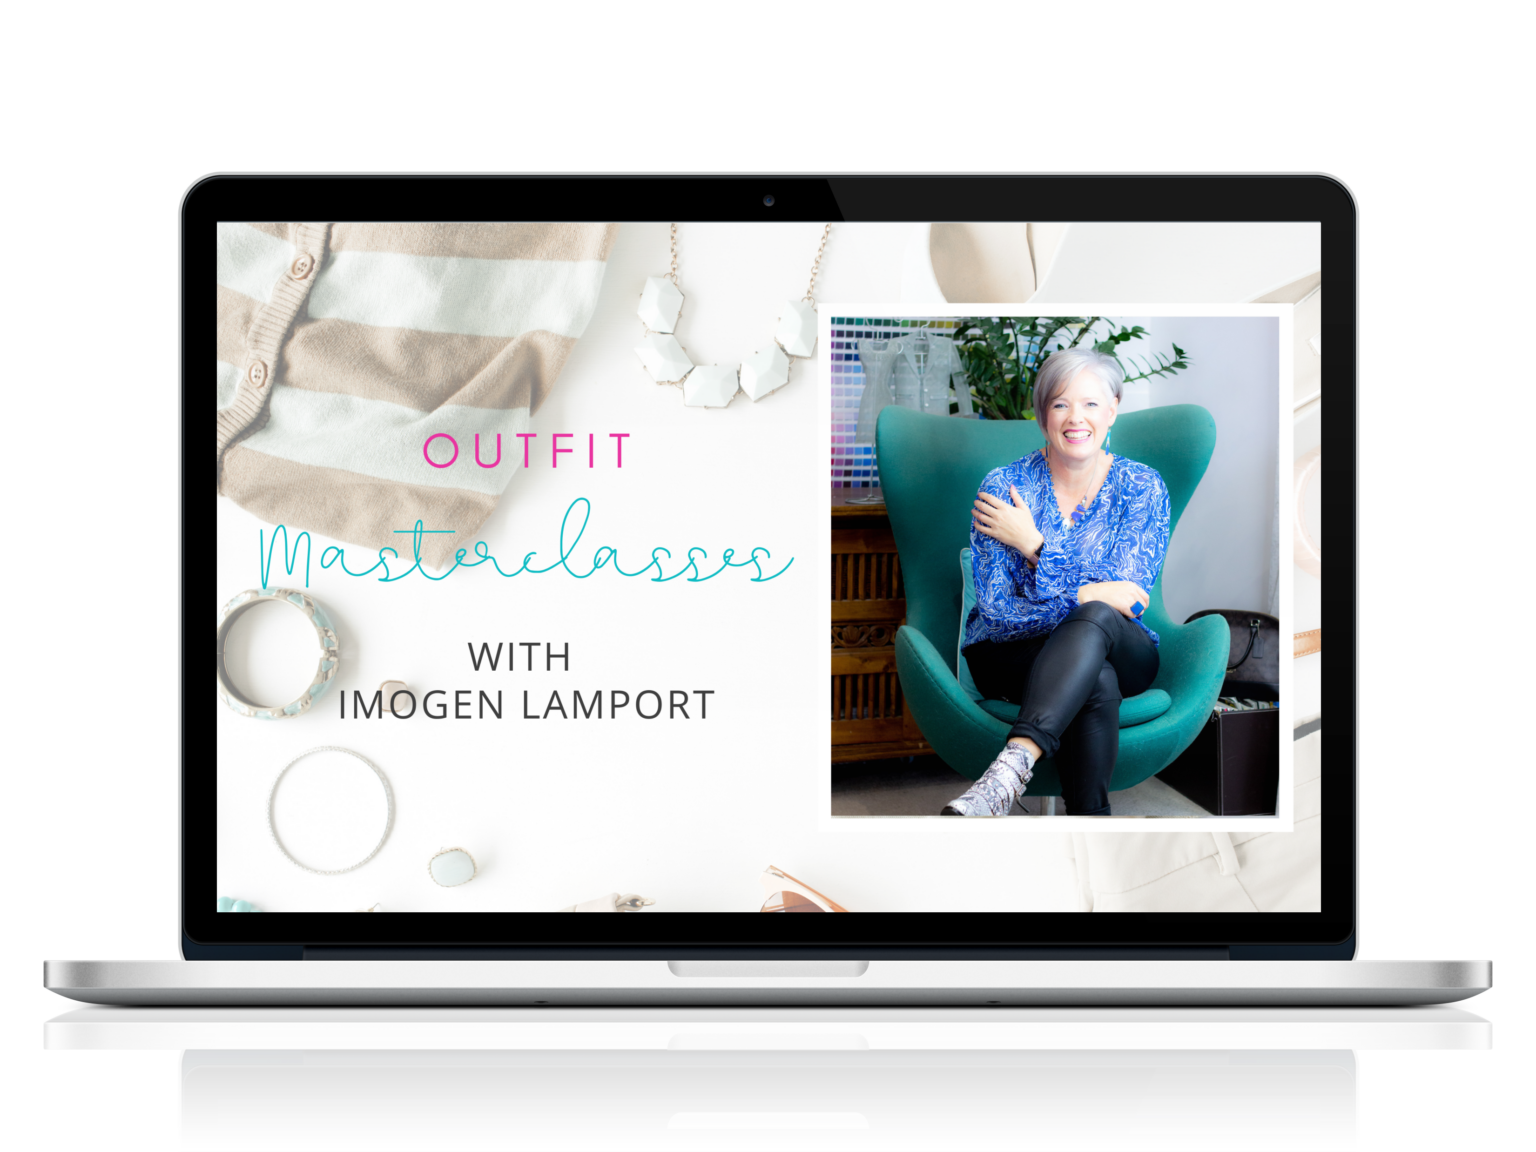 Outfit Masterclass - how to put stylish outfits together from your wardrobe every single day with ease by Imogen Lamport